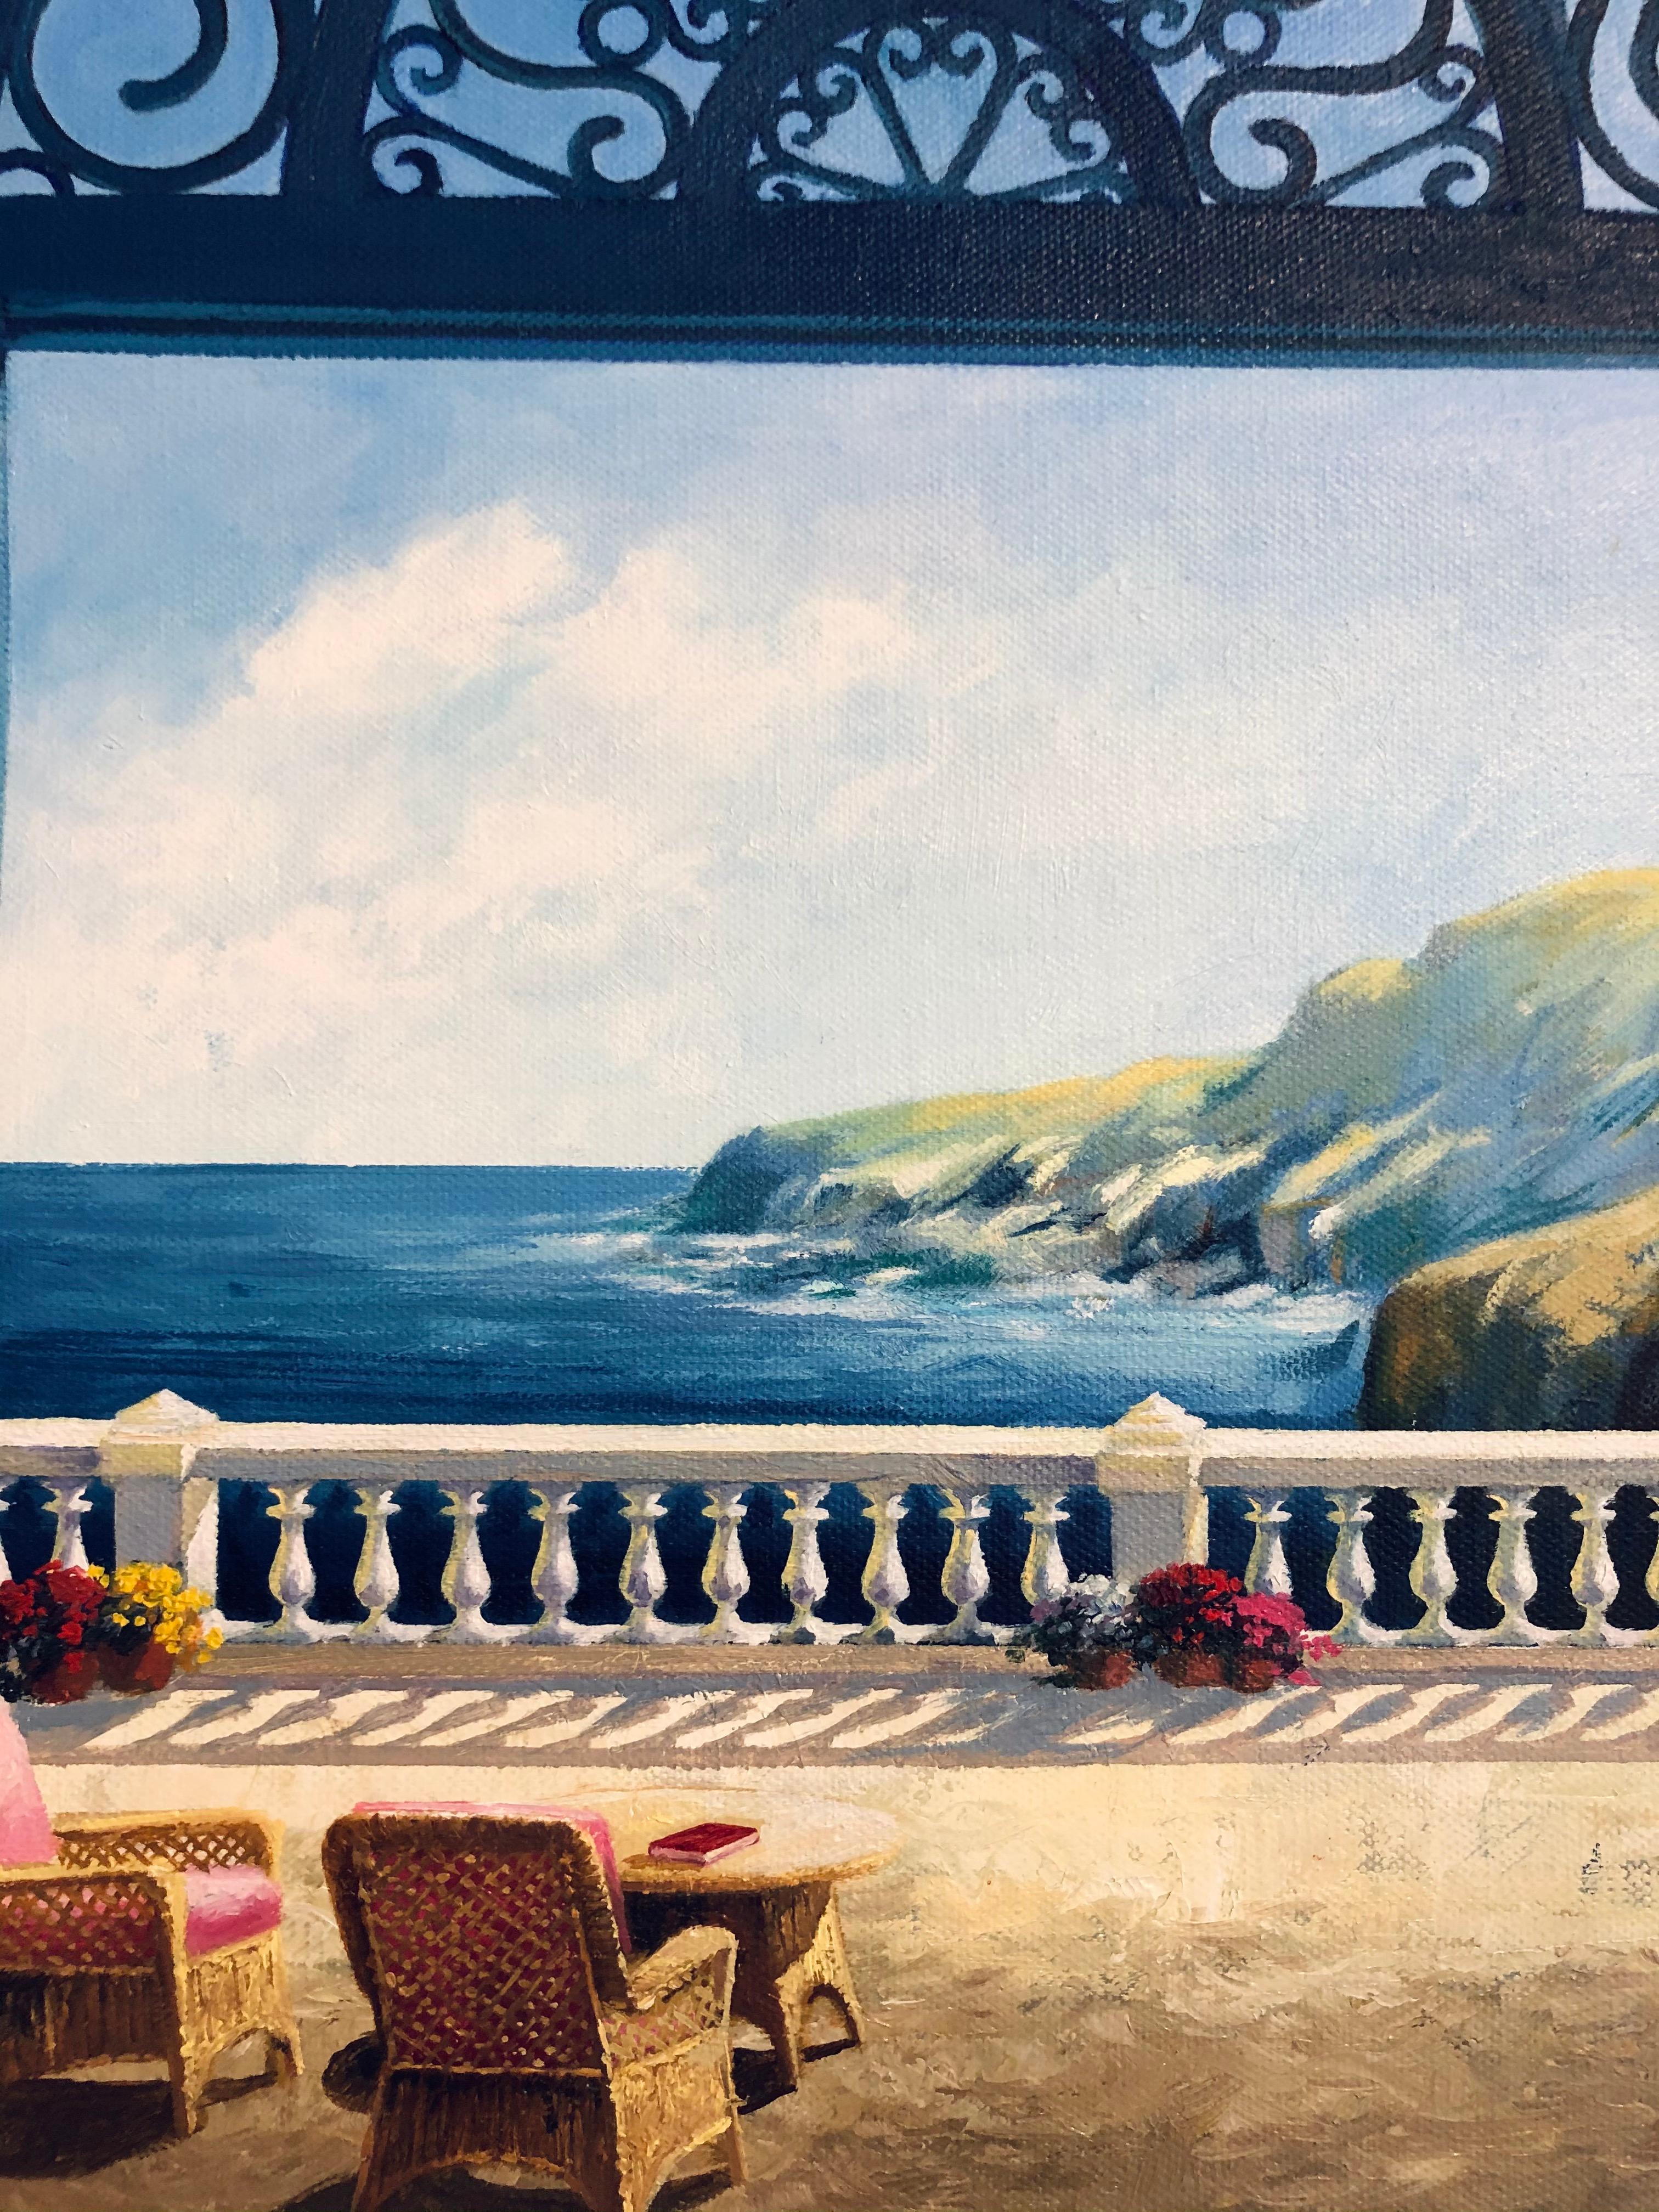 The original impressionism painting by Luis Fuentes is painted on canvas. The artist creates a cheerful composition of a sea view with cliffs and terrace, perceived from the inviting position of an open window. The viewer is enticed to observe a